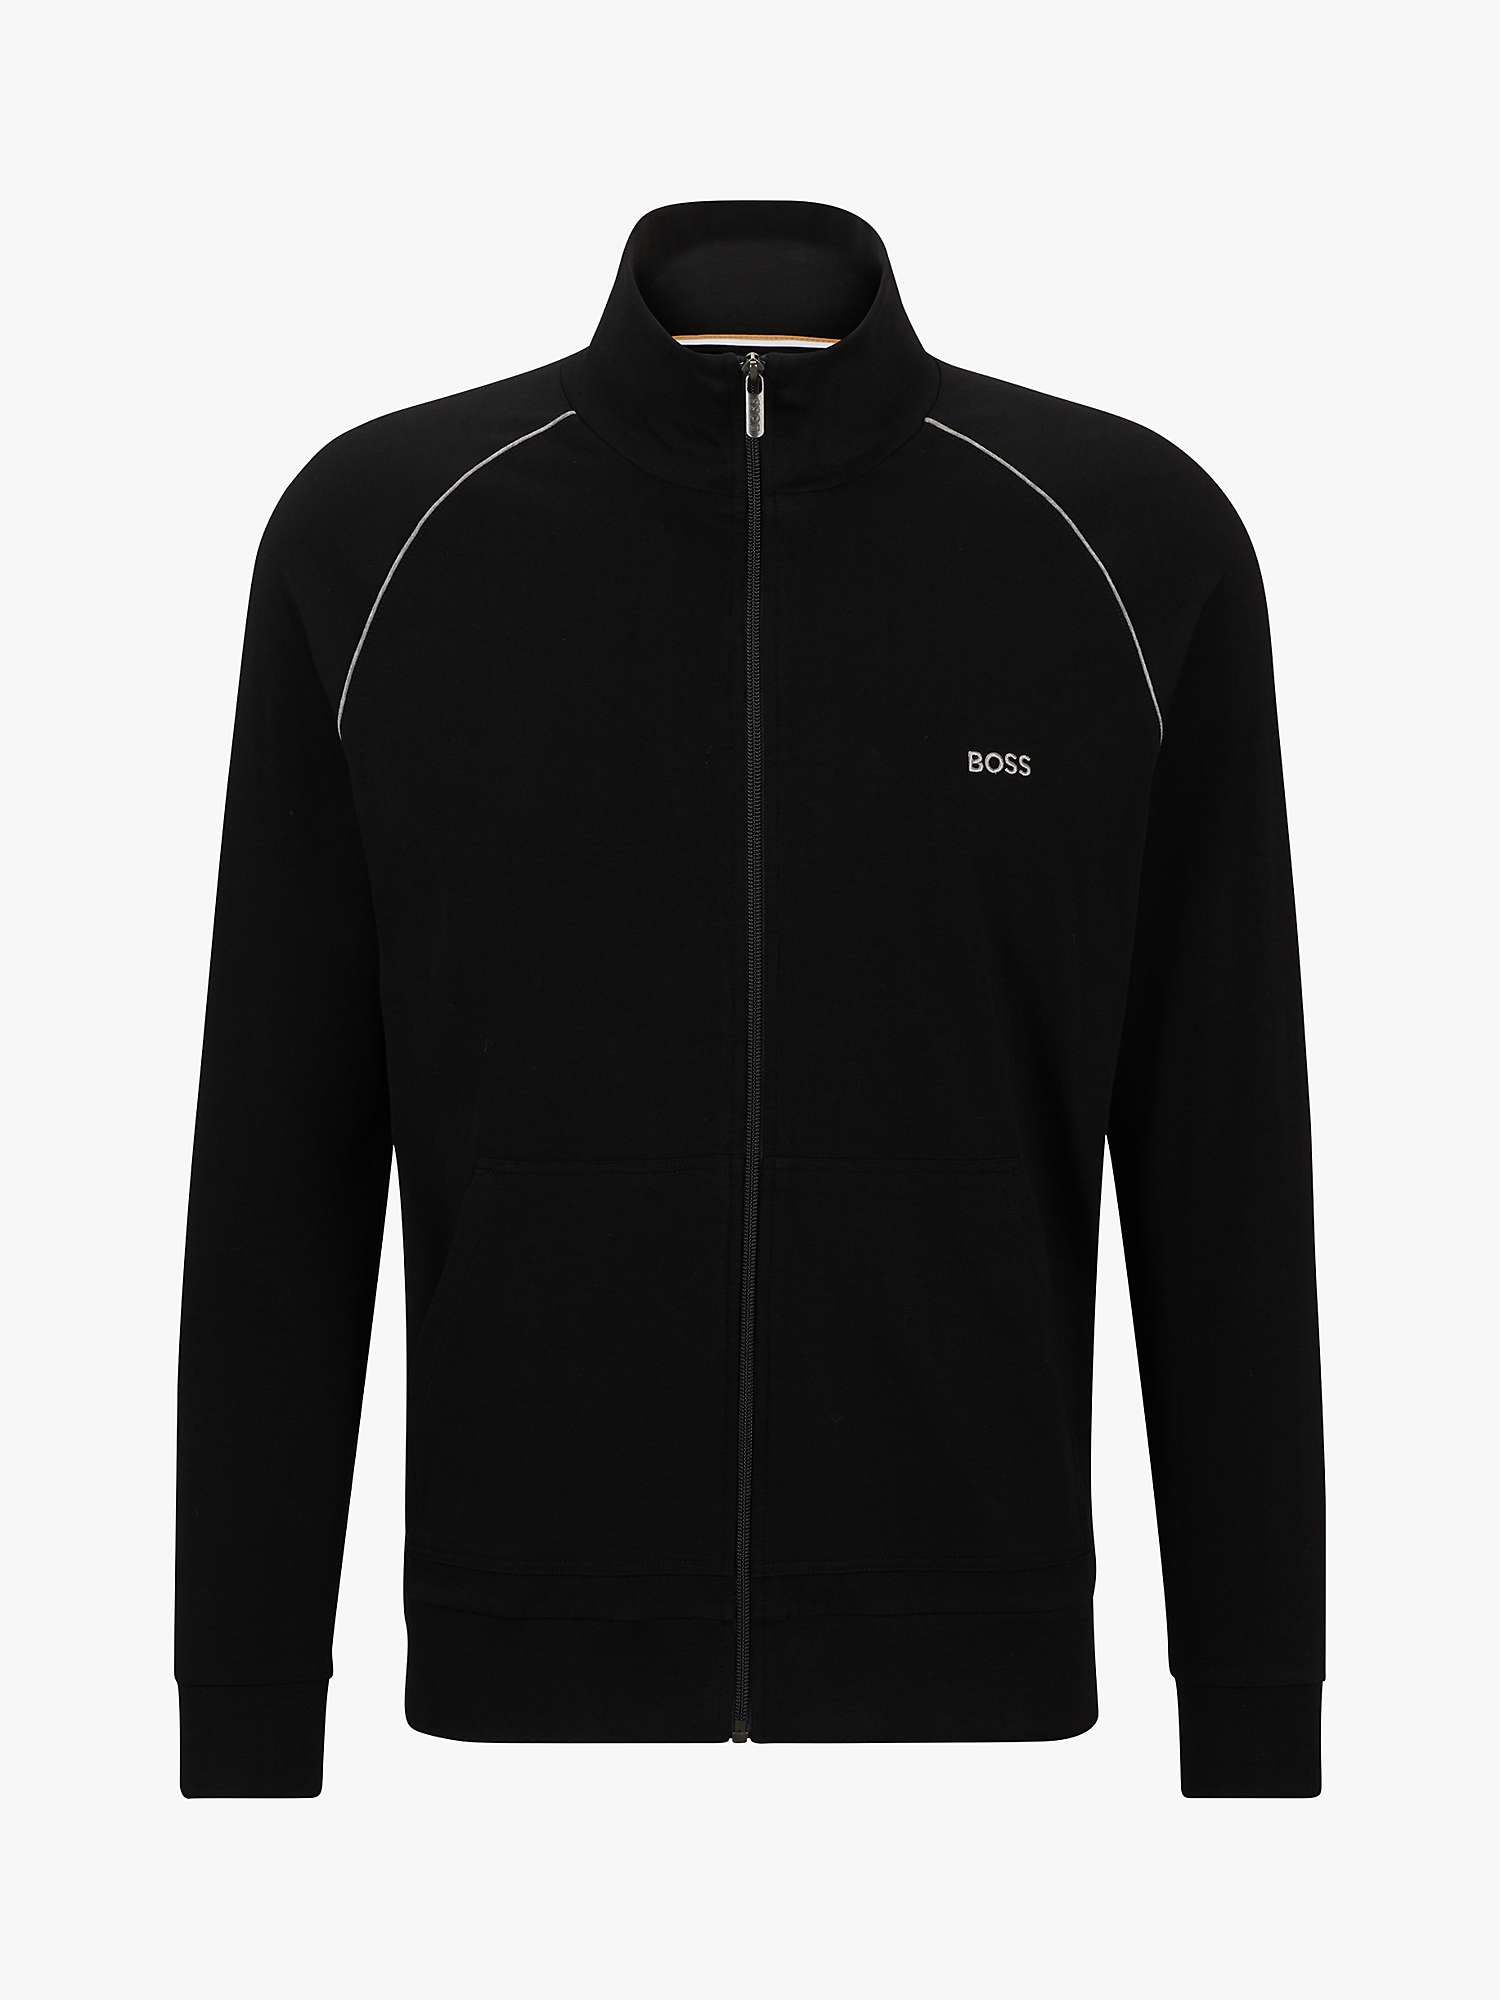 Buy BOSS Contrast Piping Track Top, Black Online at johnlewis.com